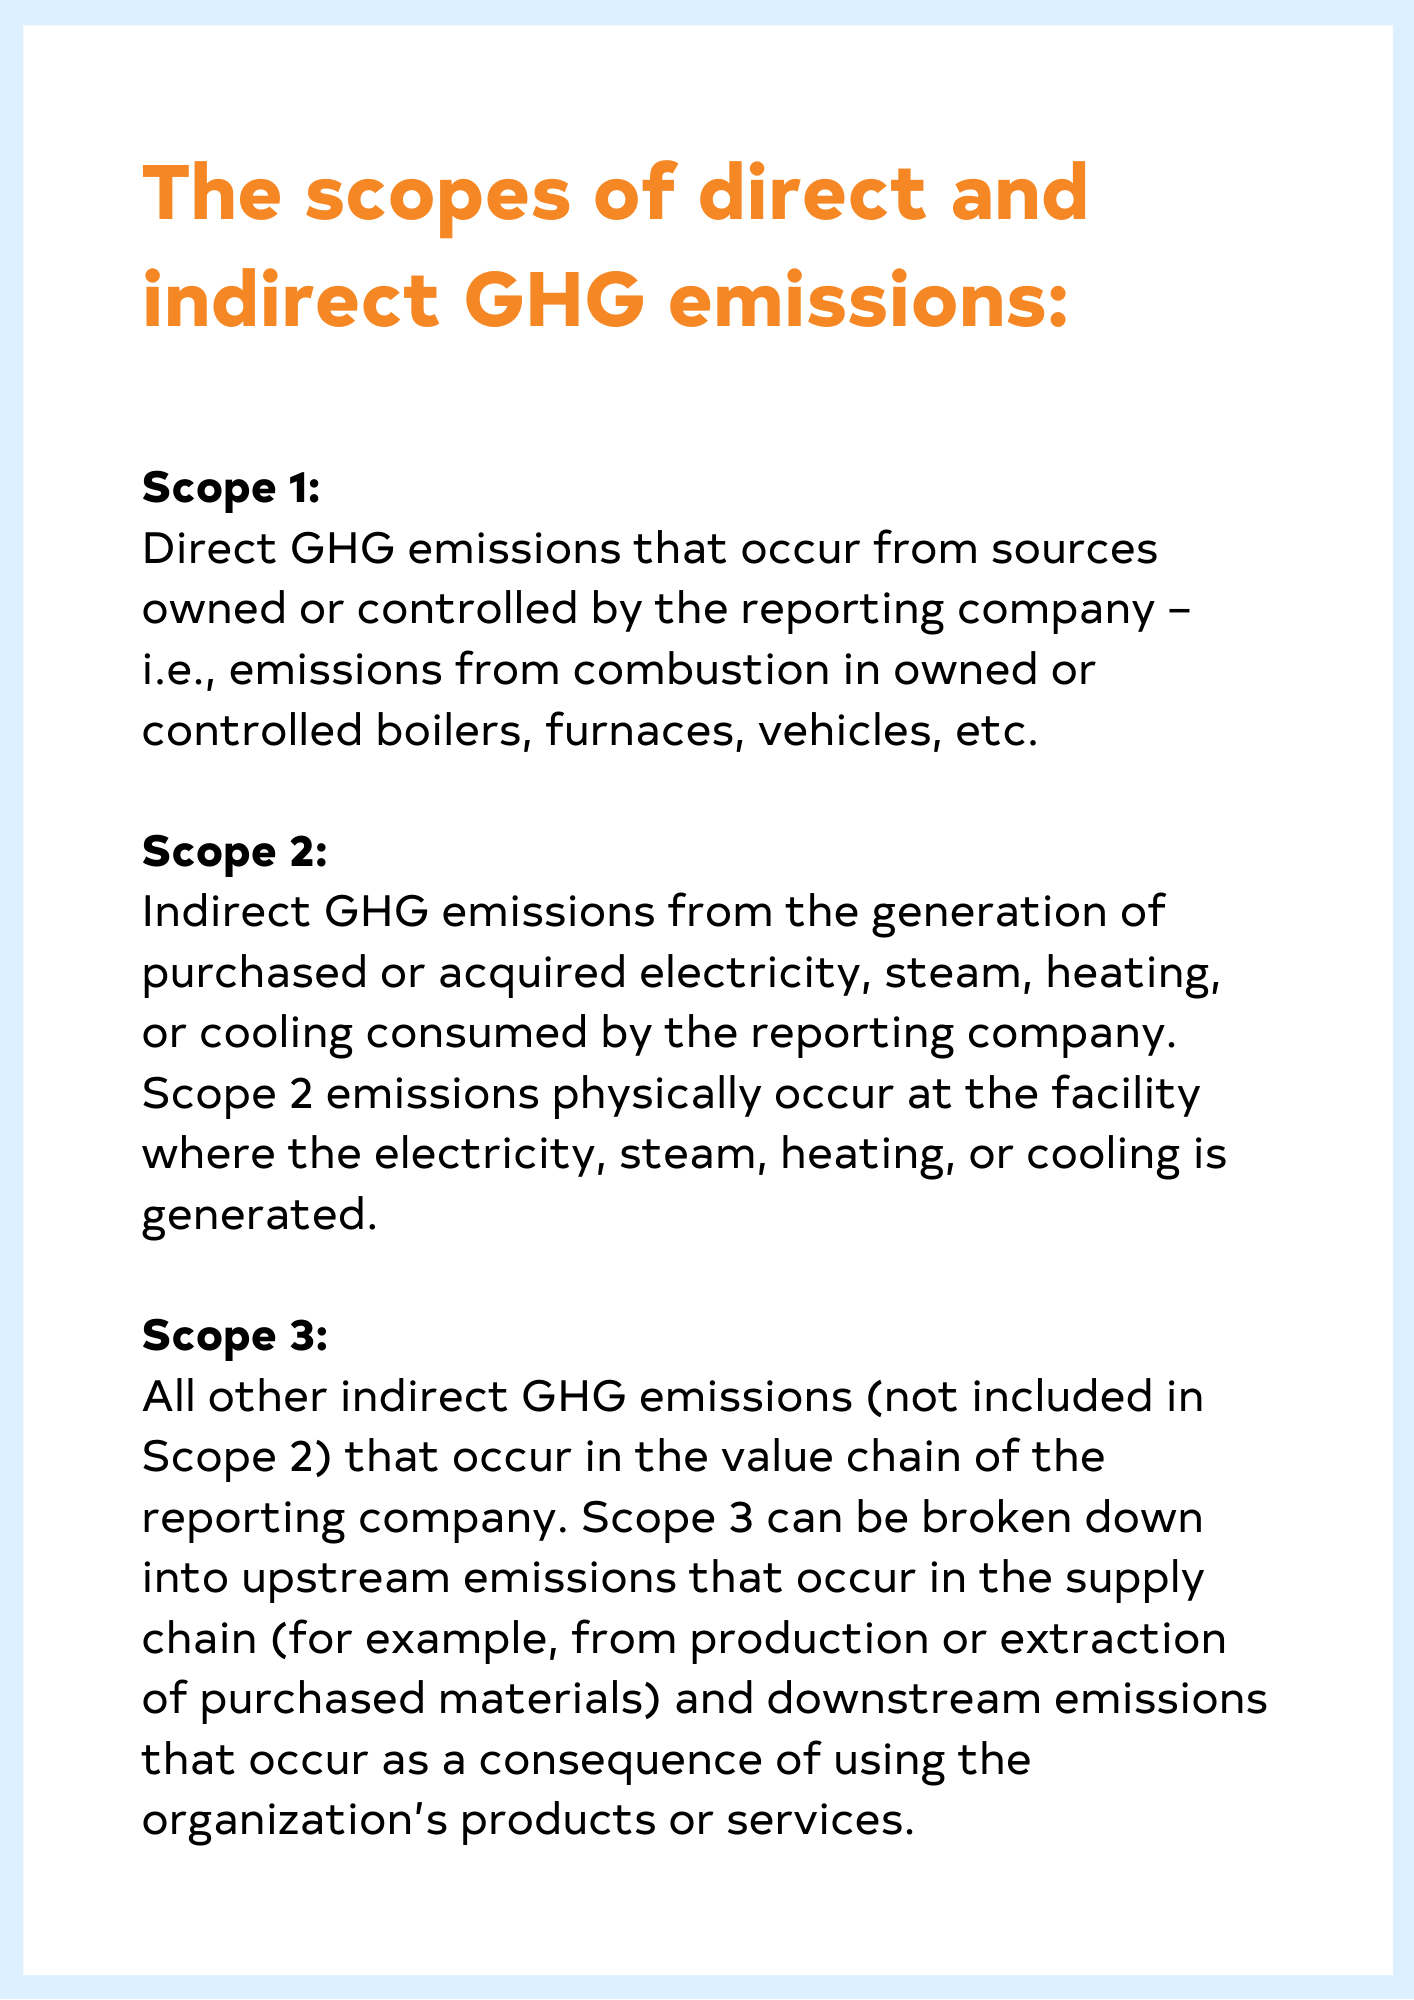 Scopes of direct and indirect GHG emissions